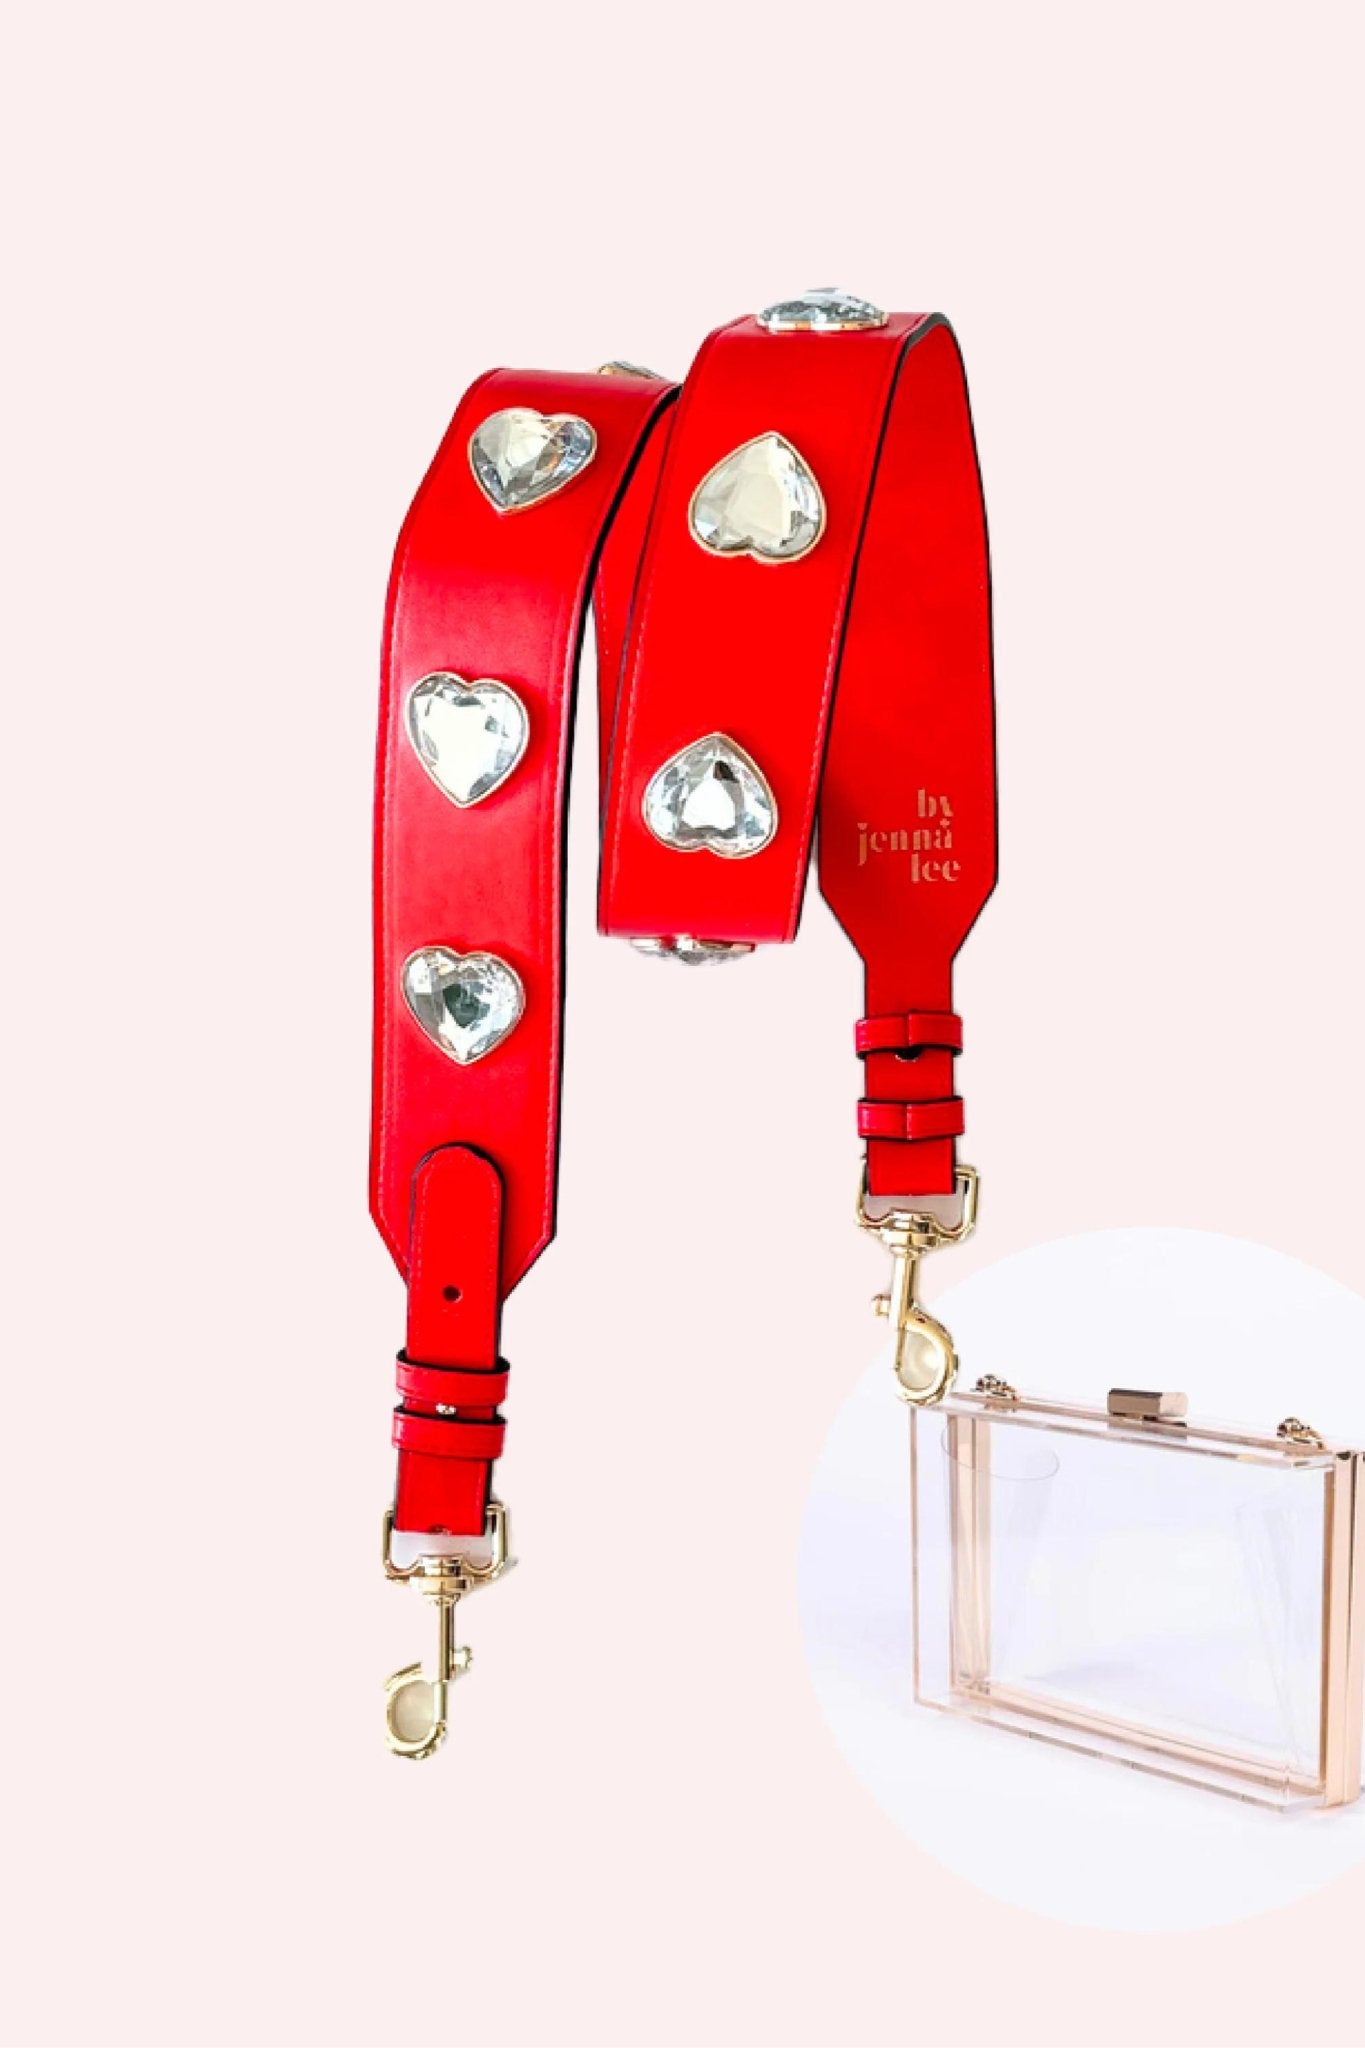 Crystal Heart Bag Strap Red + Clear Bag - By Jenna Lee - Color Game